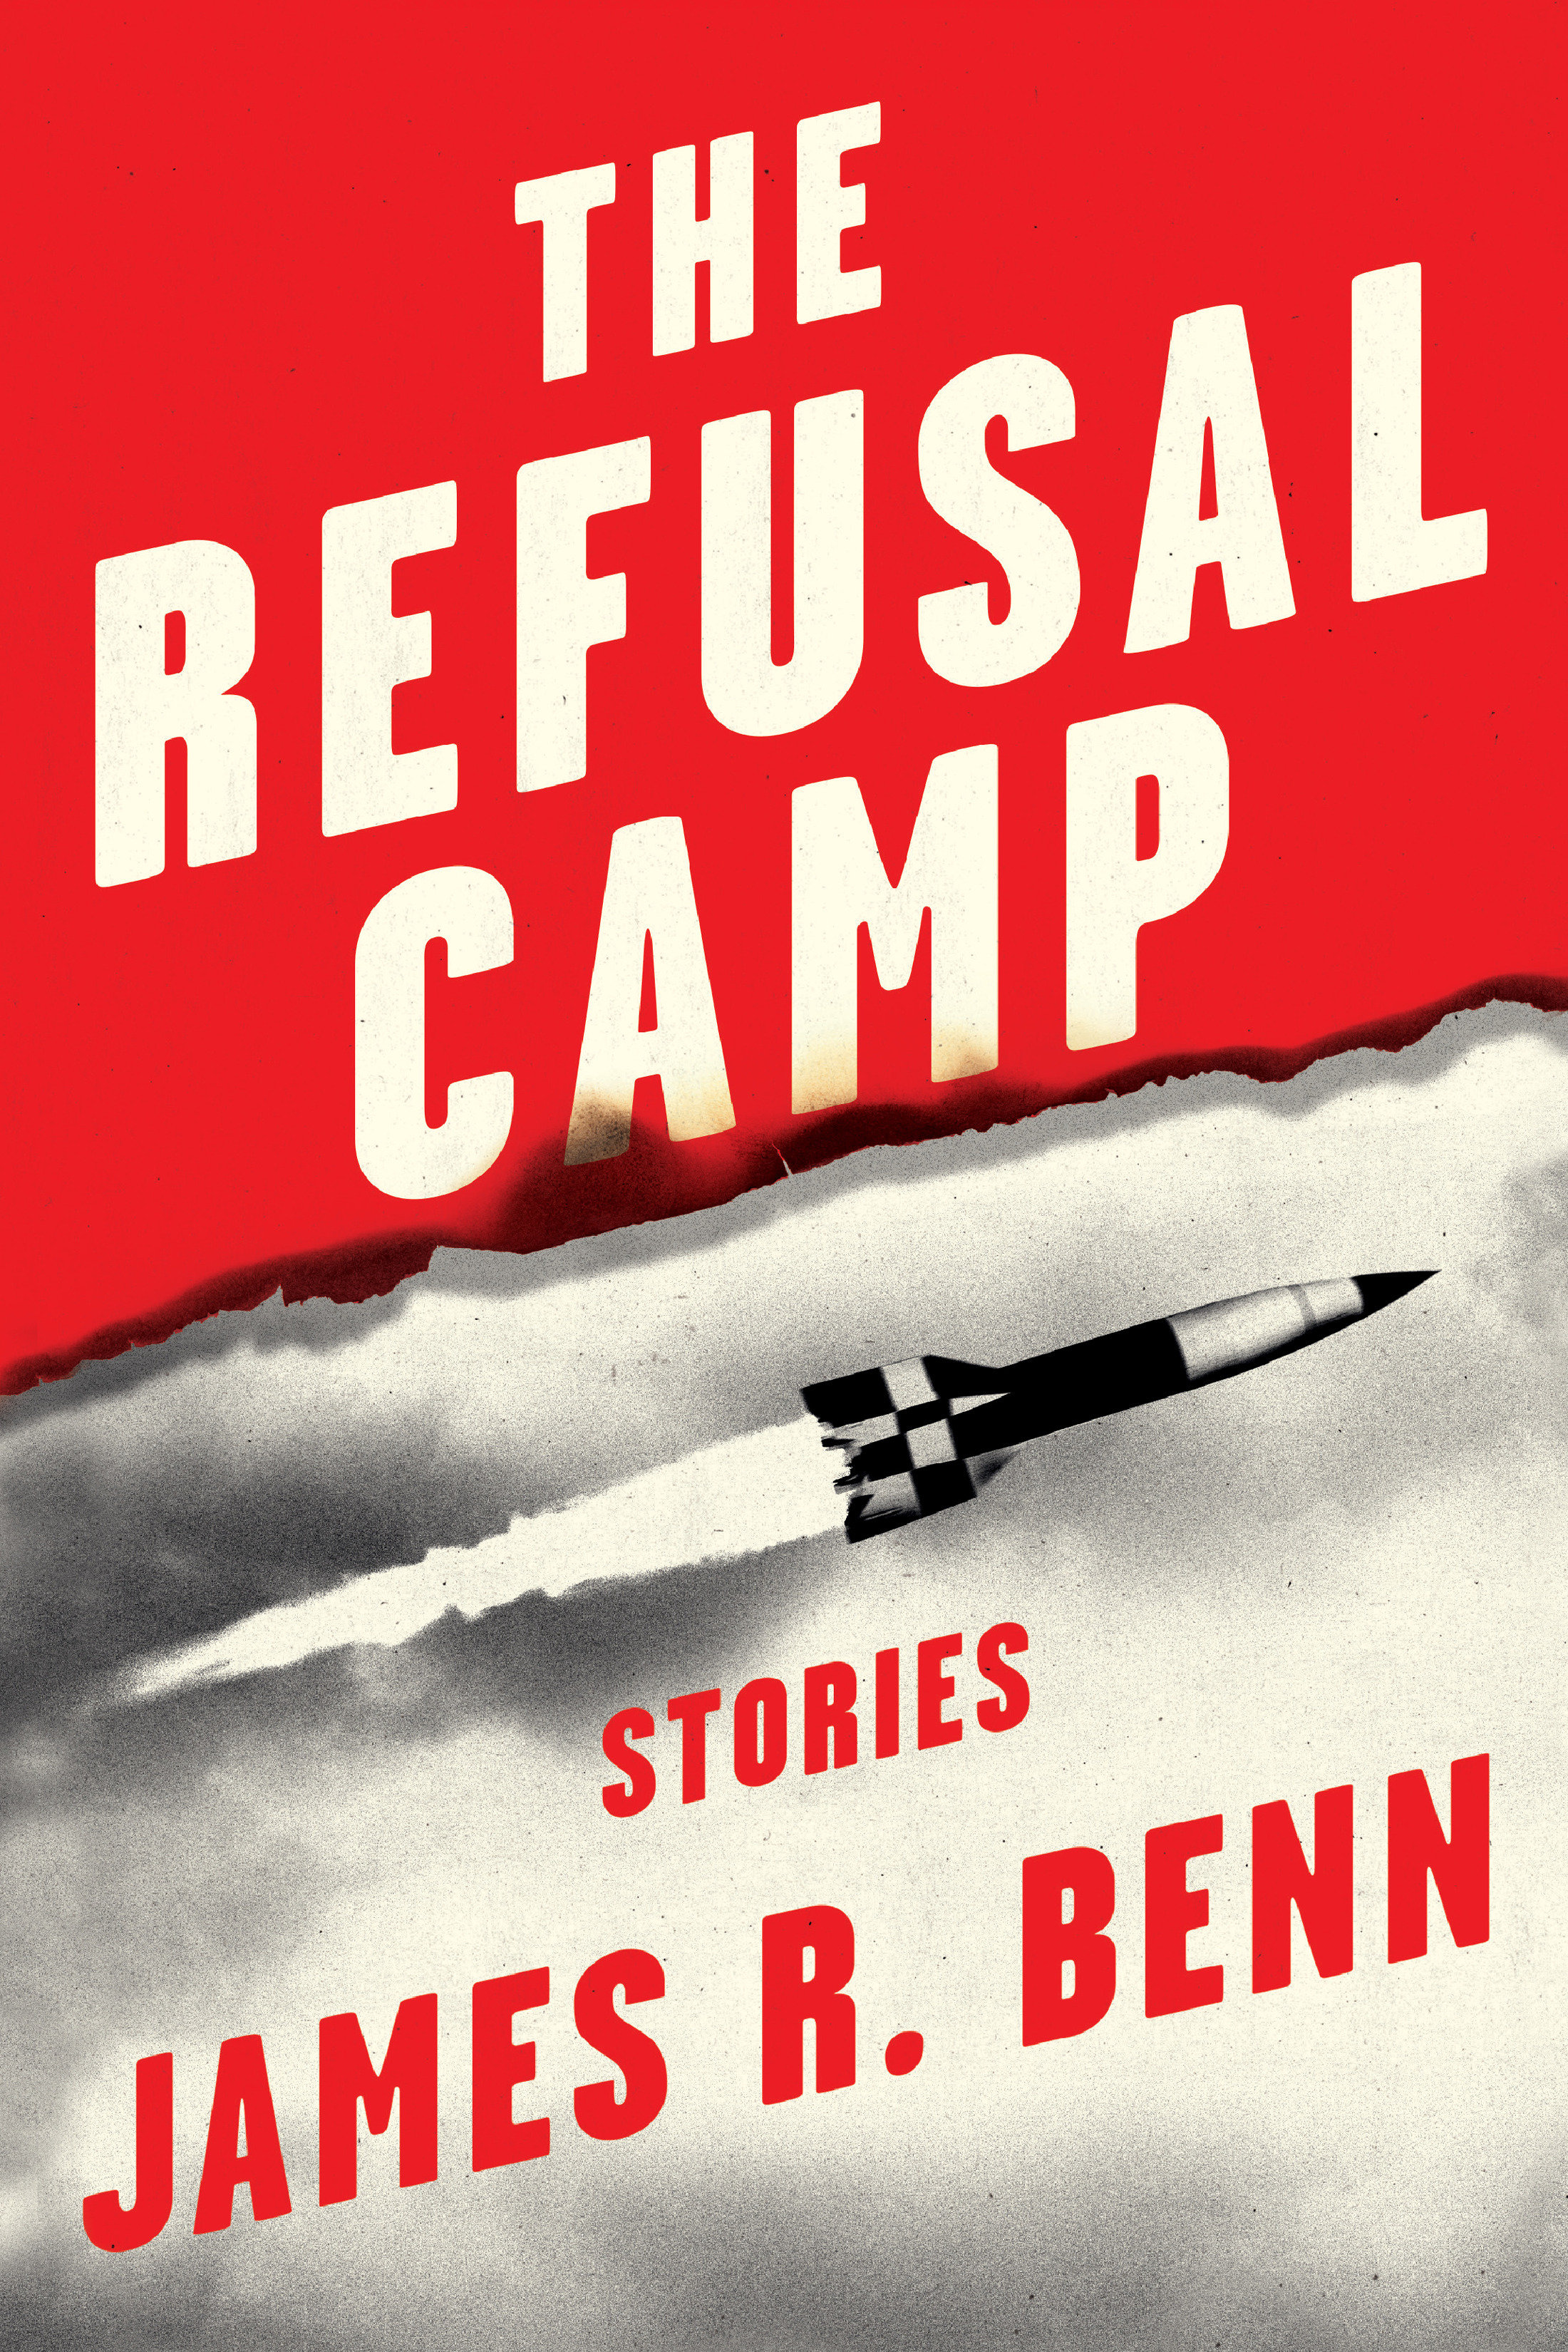 The Refusal Camp (Hardcover Book)